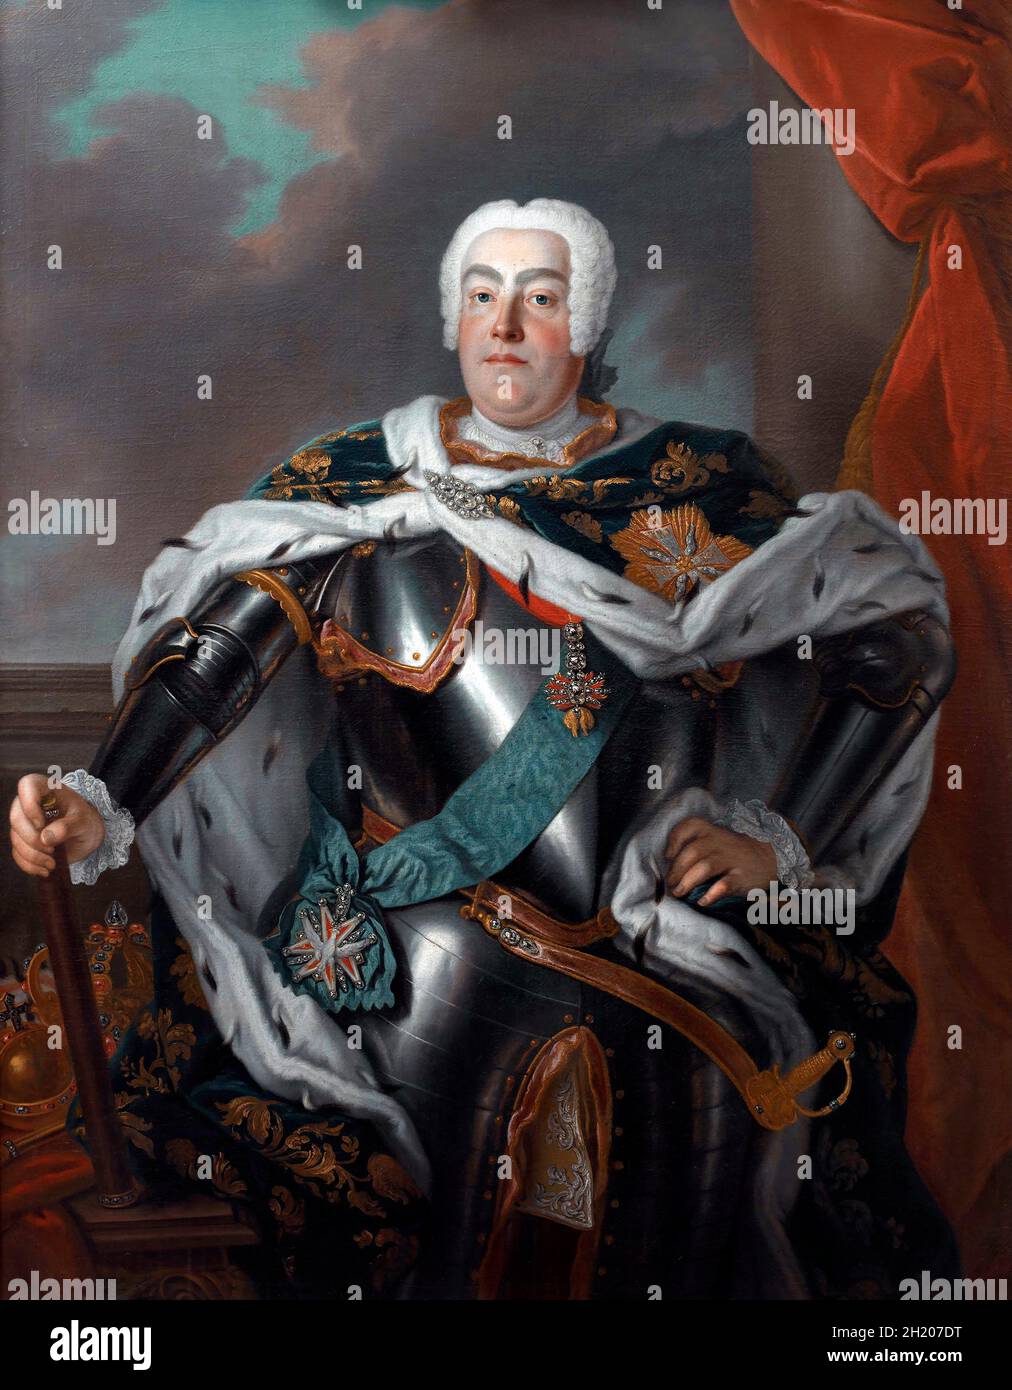 Portrait of Augustus III (1696-1763), King of Poland and Grand Duke of Lithuania by Louis de Silvestre, oil on canvas, c. 1733 Stock Photo